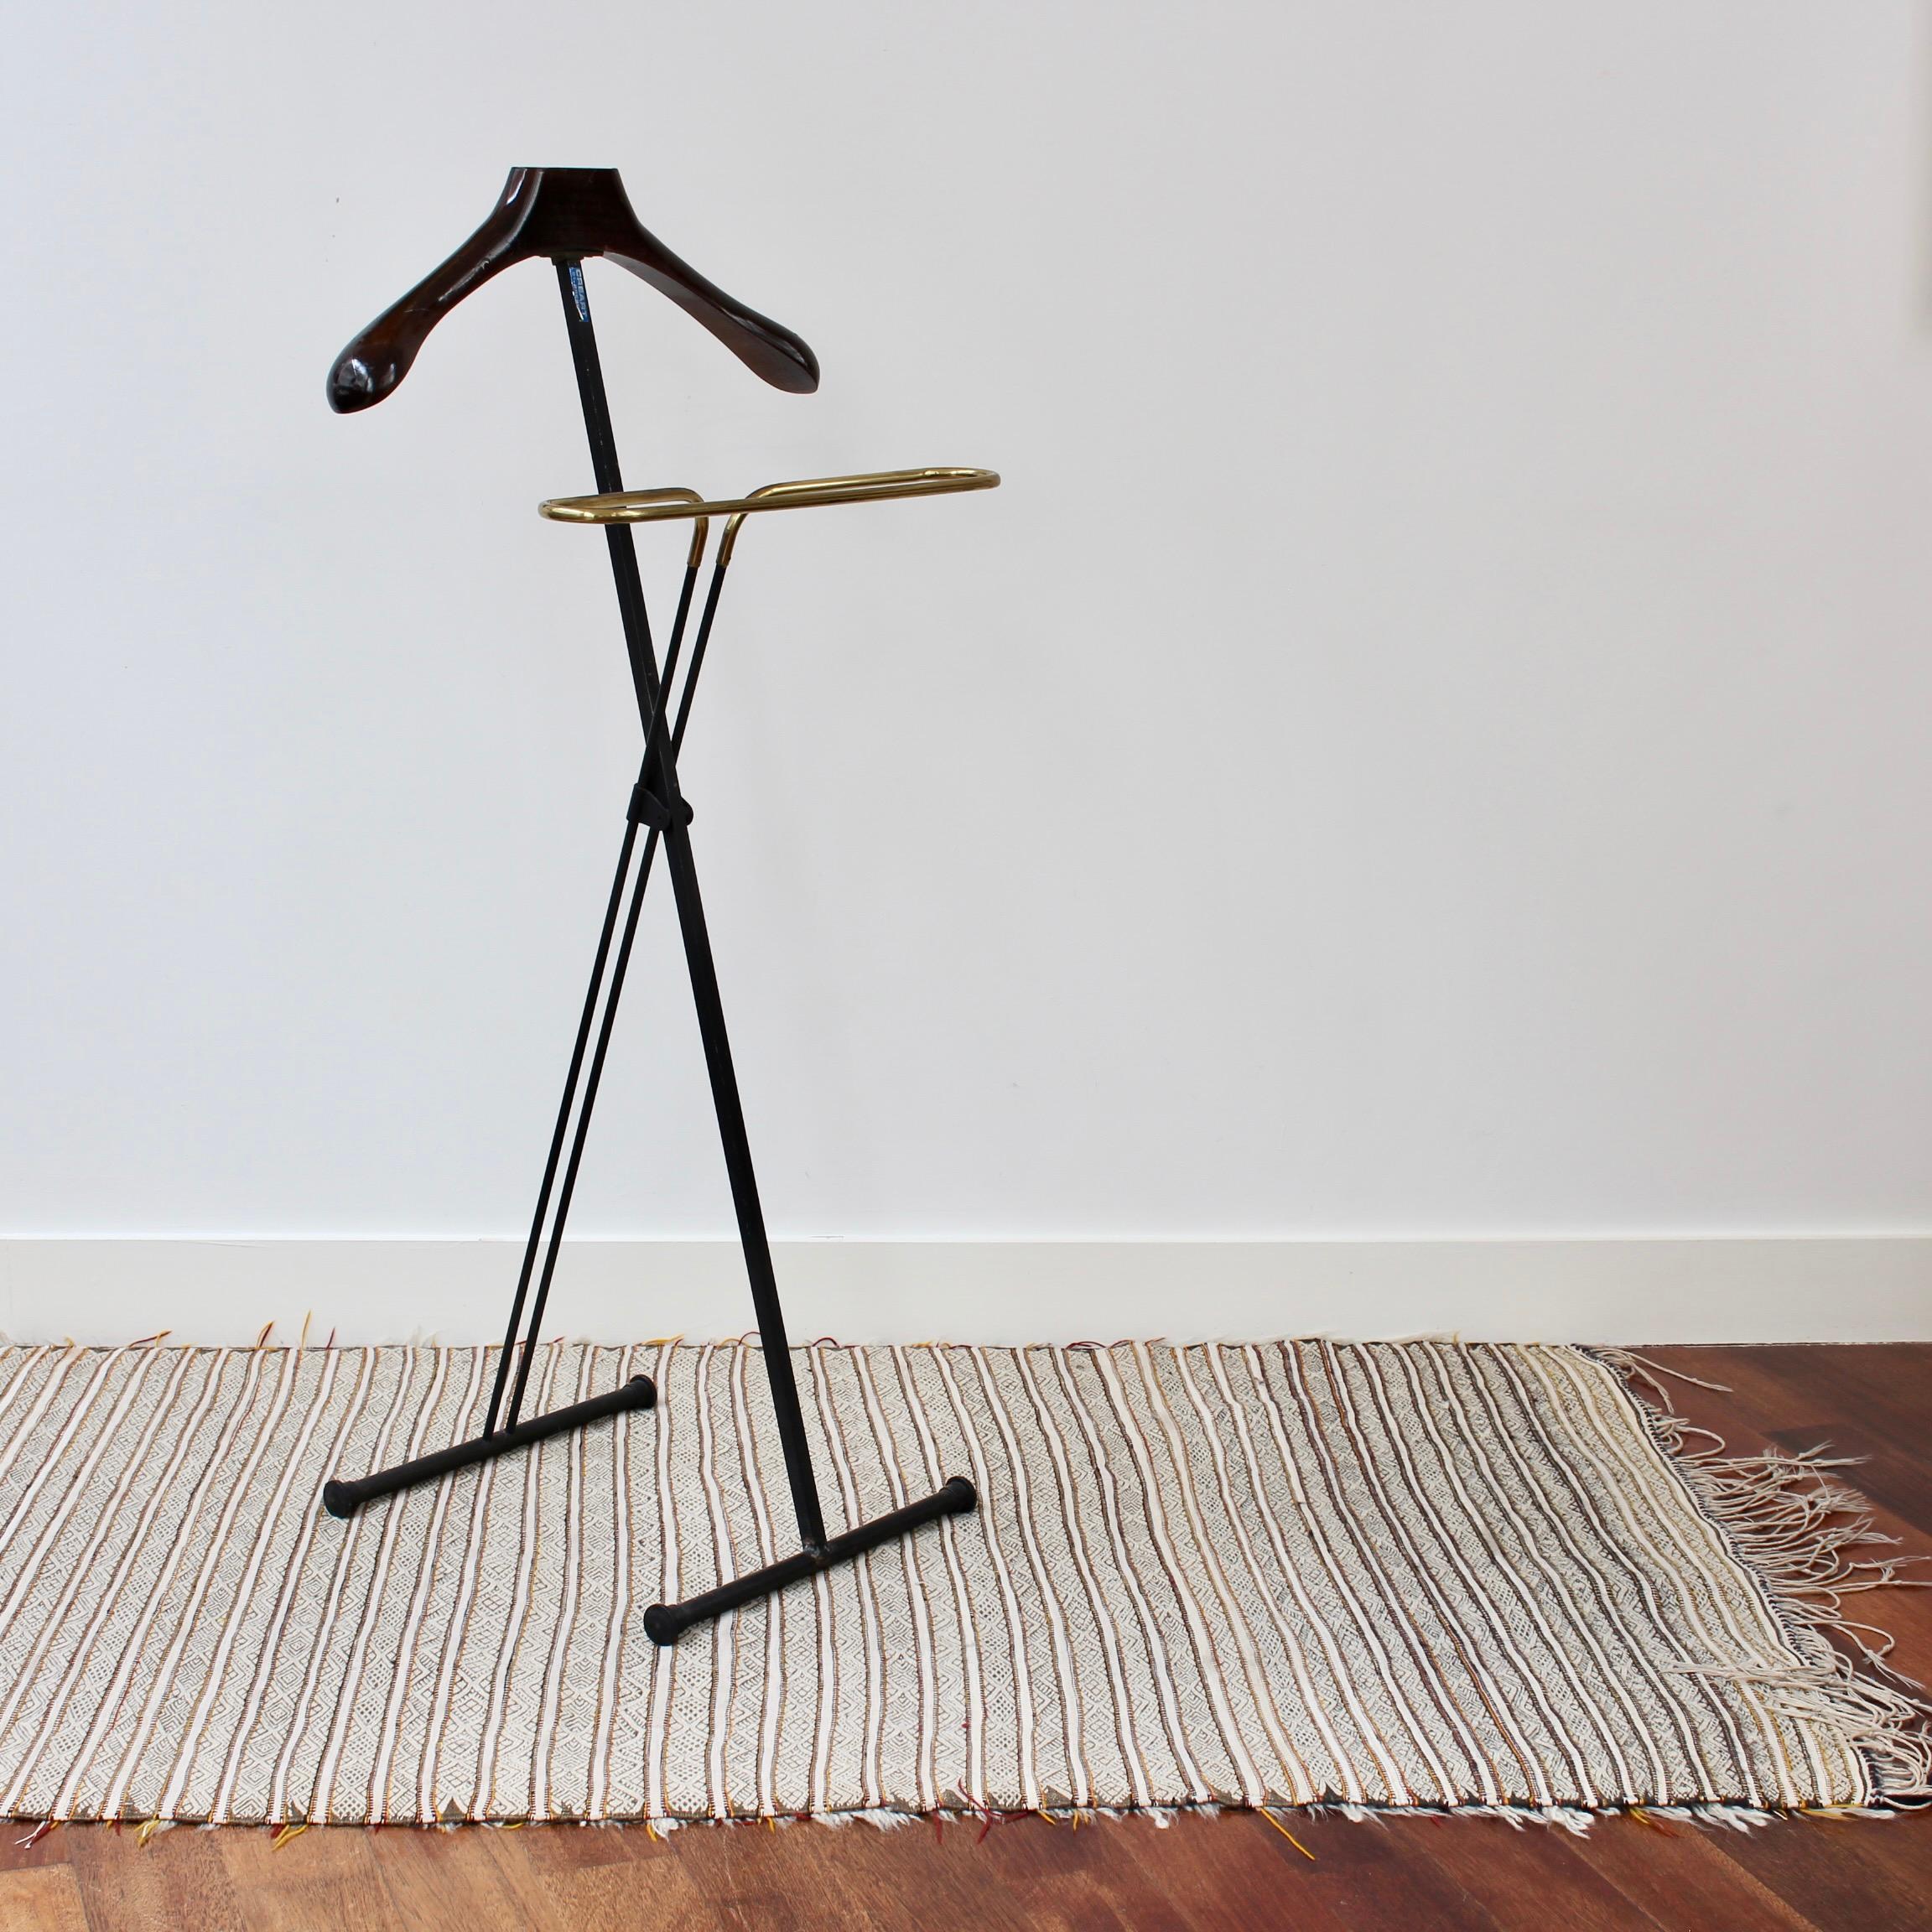 Vintage Italian valet coat stand (circa 1950s). Old world glamour and practicality all at once make this valet coat stand extremely appealing. The stand provides for a jacket or coat to be hung on the wooden piece while trousers fold over the